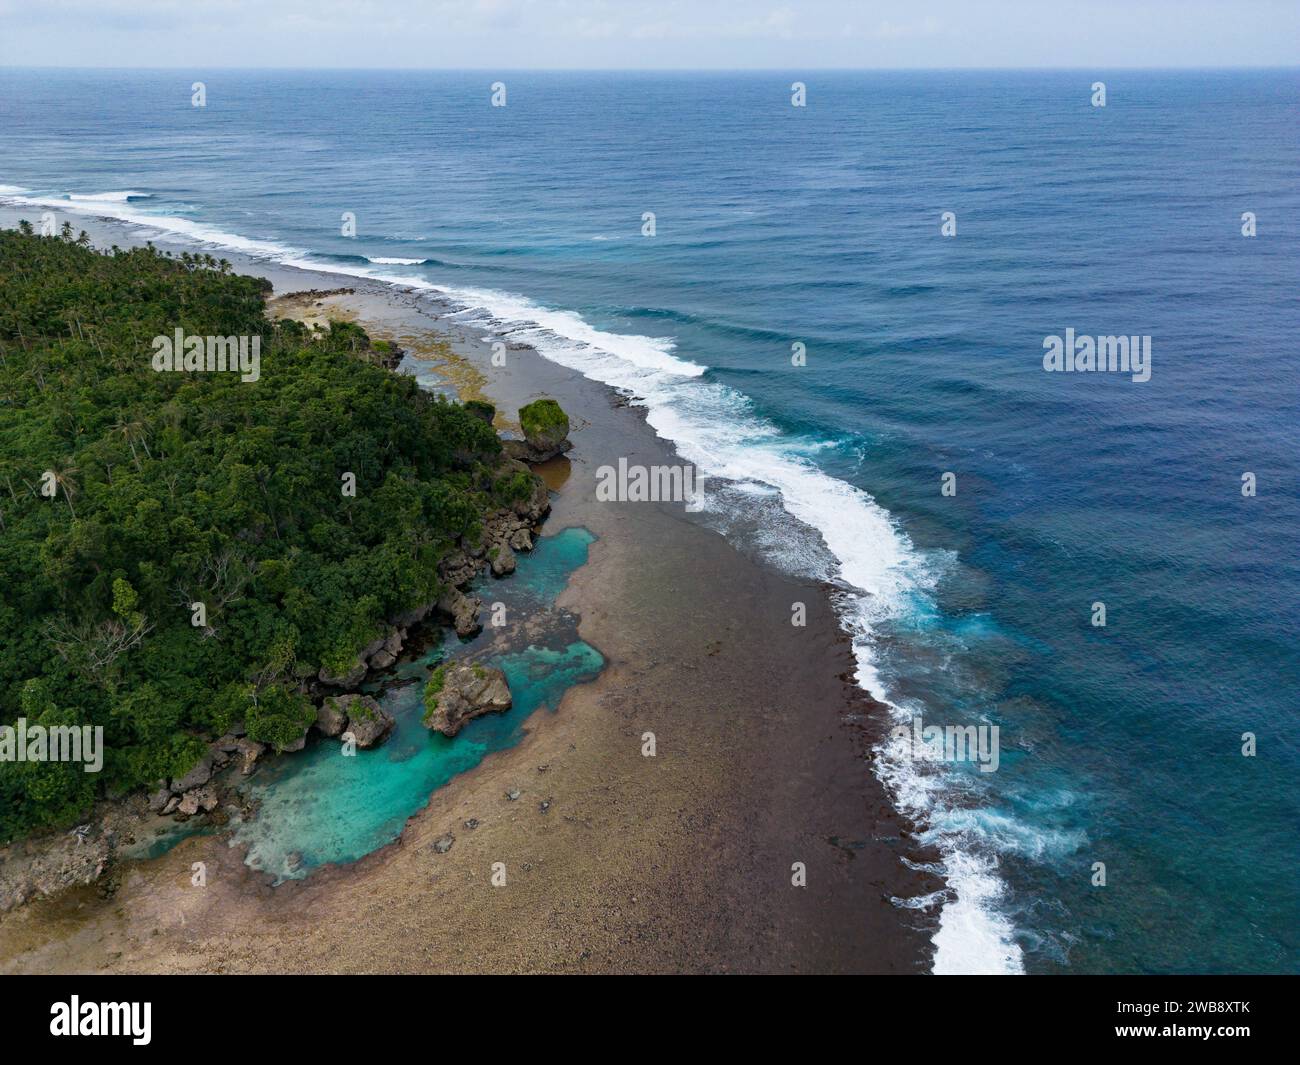 An aerial view of Magpupungko Tidal Pool, Siargao Island, Philippines Stock Photo